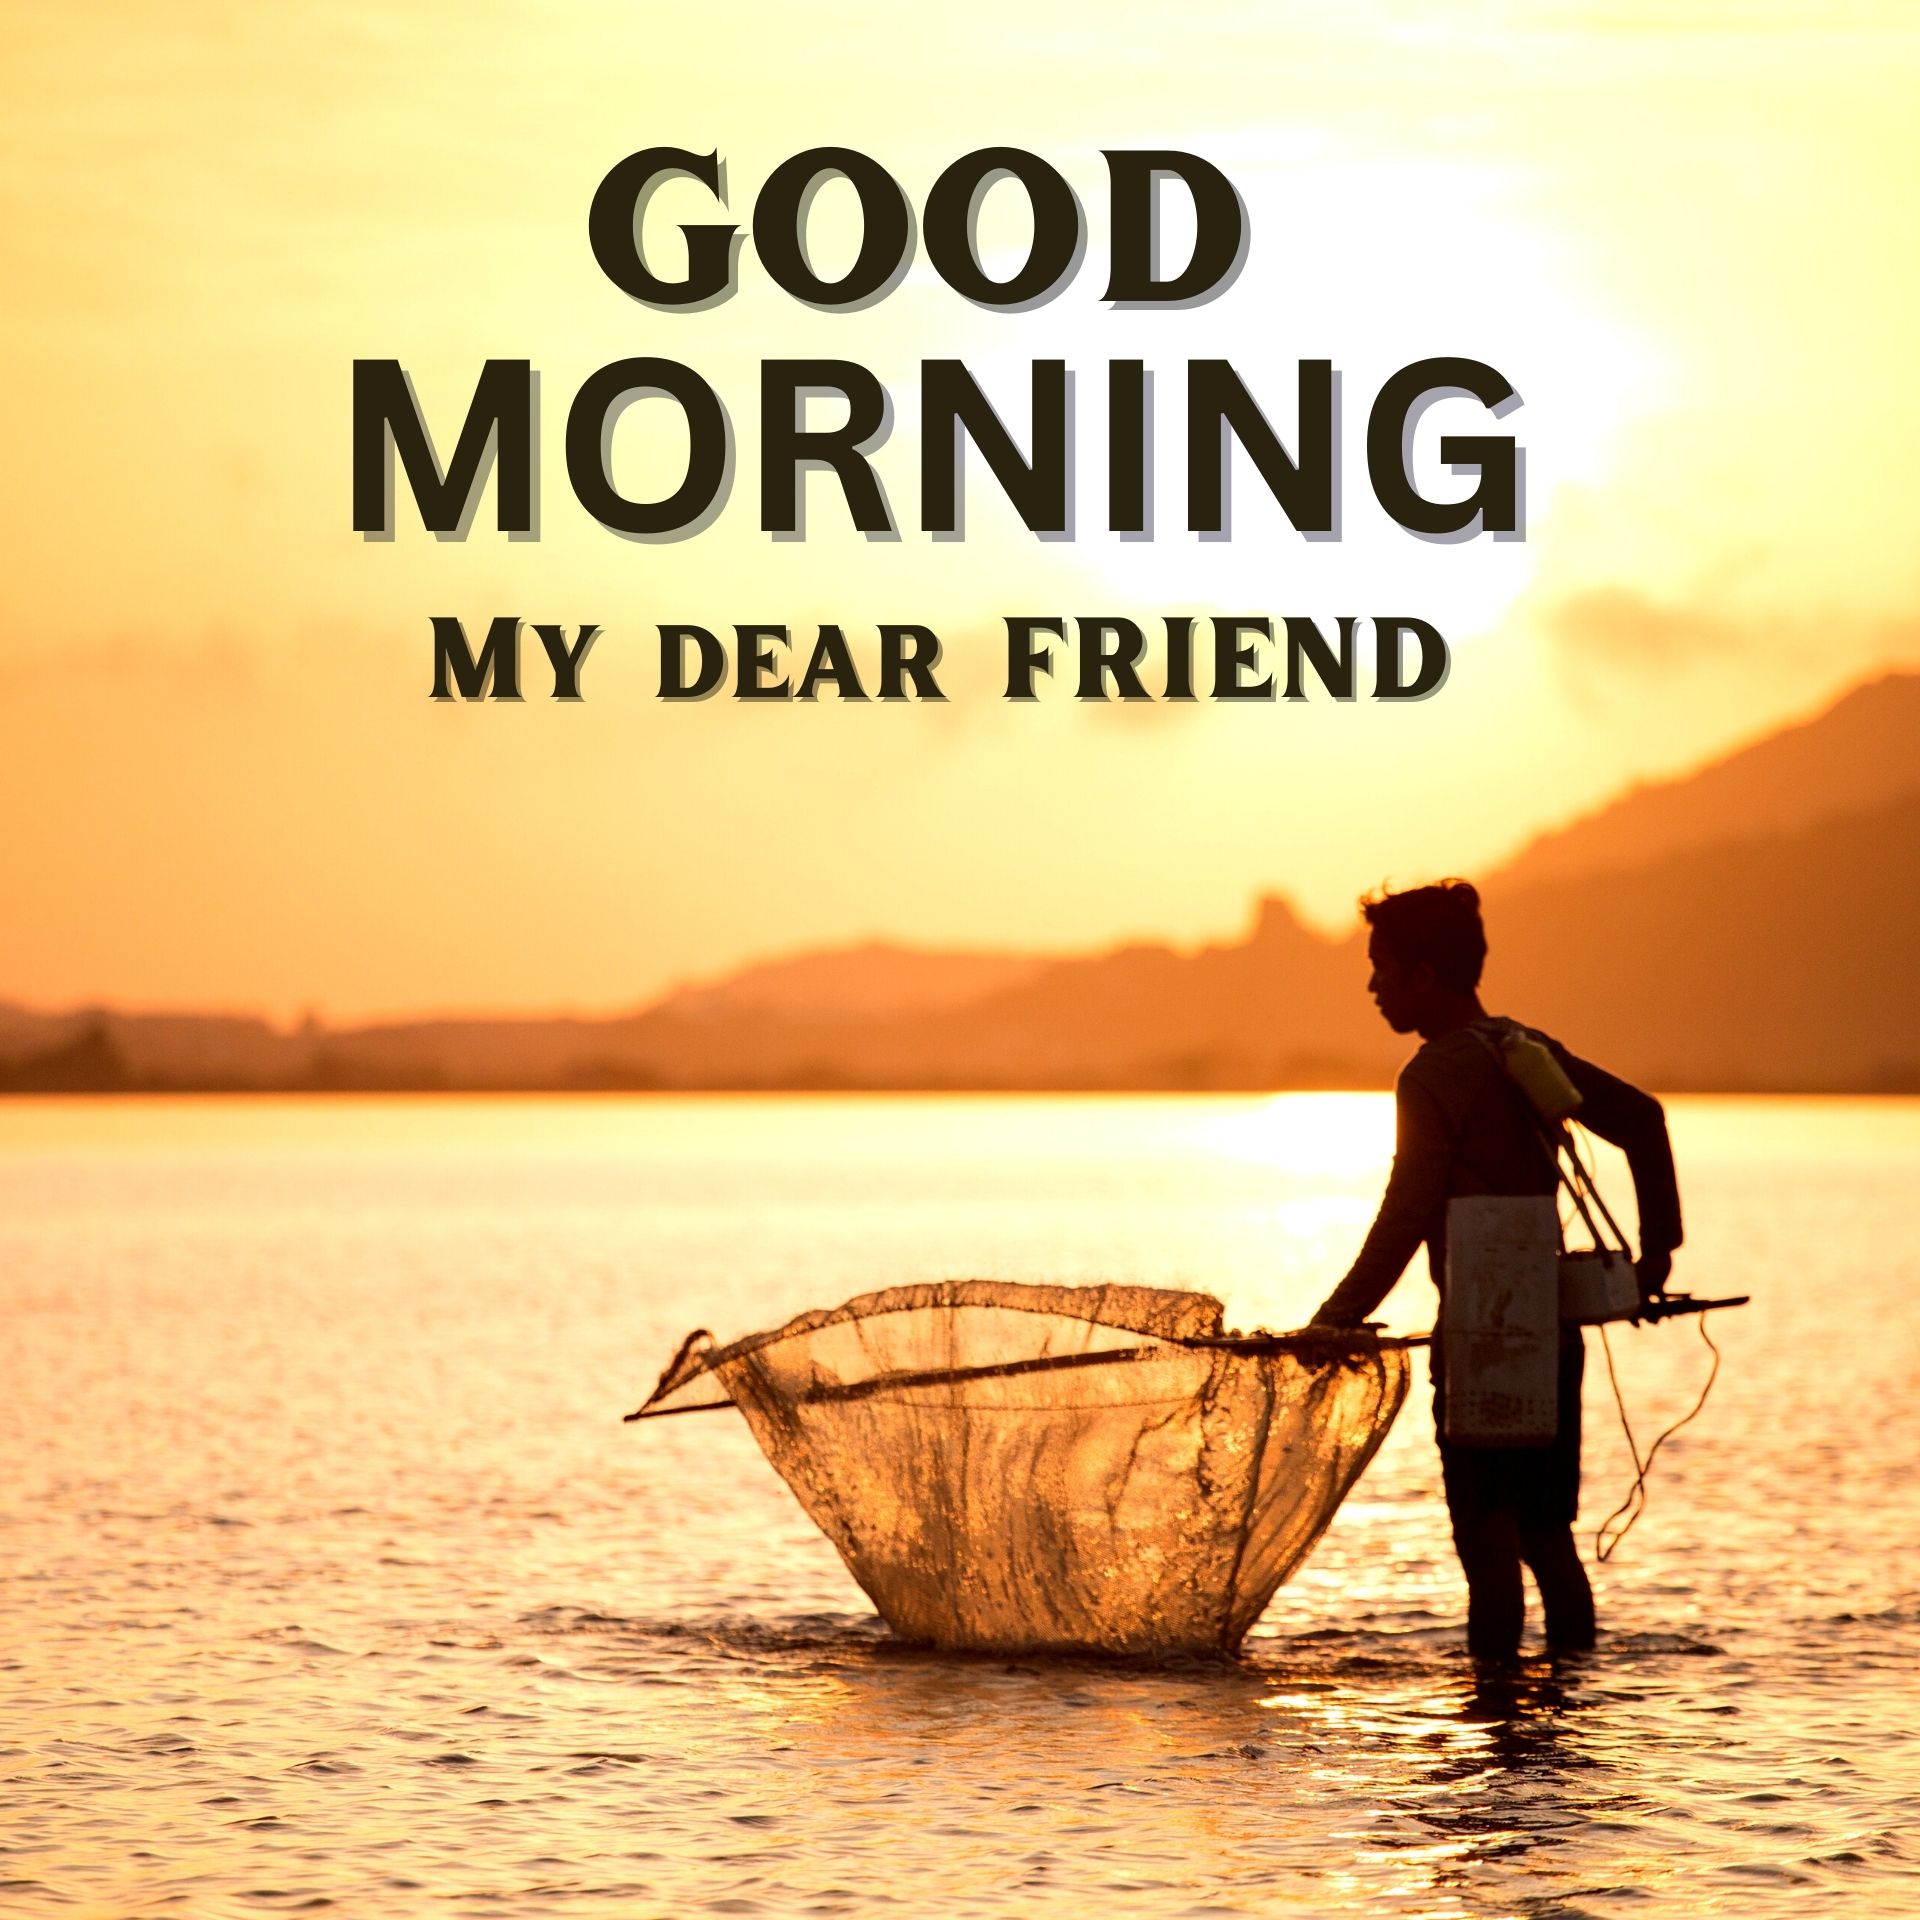 Download Latest Good Morning Images Download 1